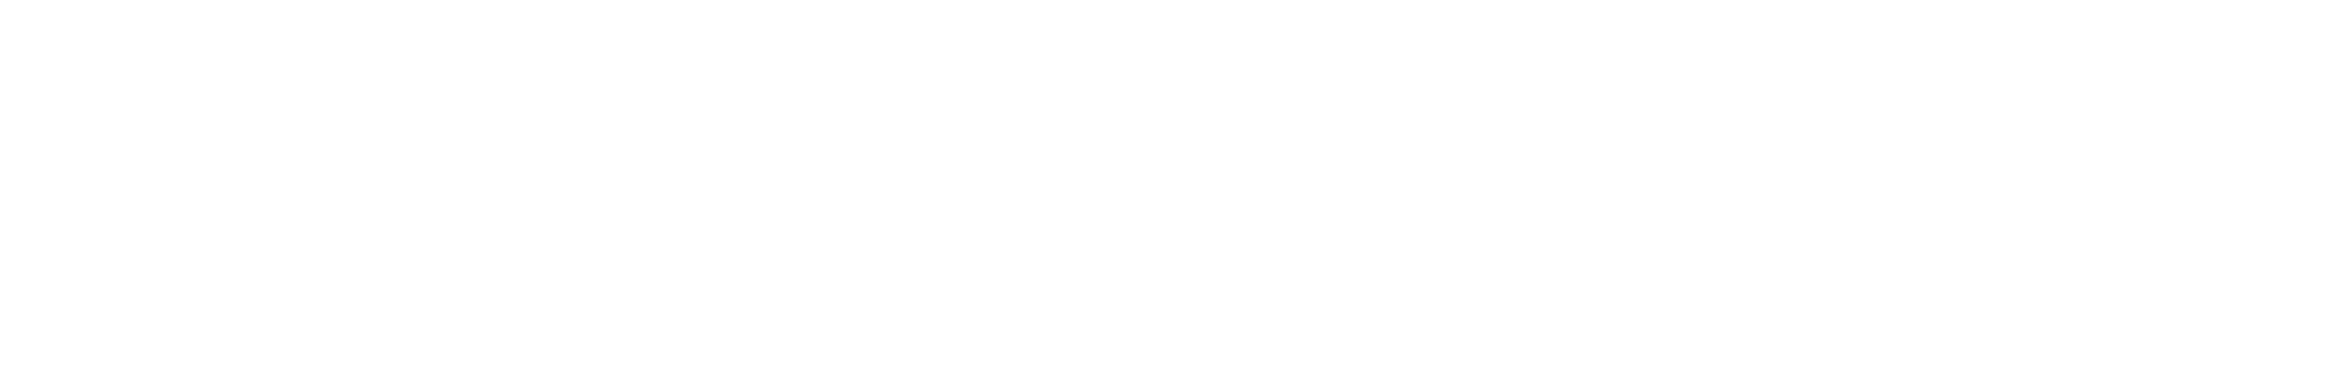 CrowdRiff Logo - Transparent icon with white text-1.png